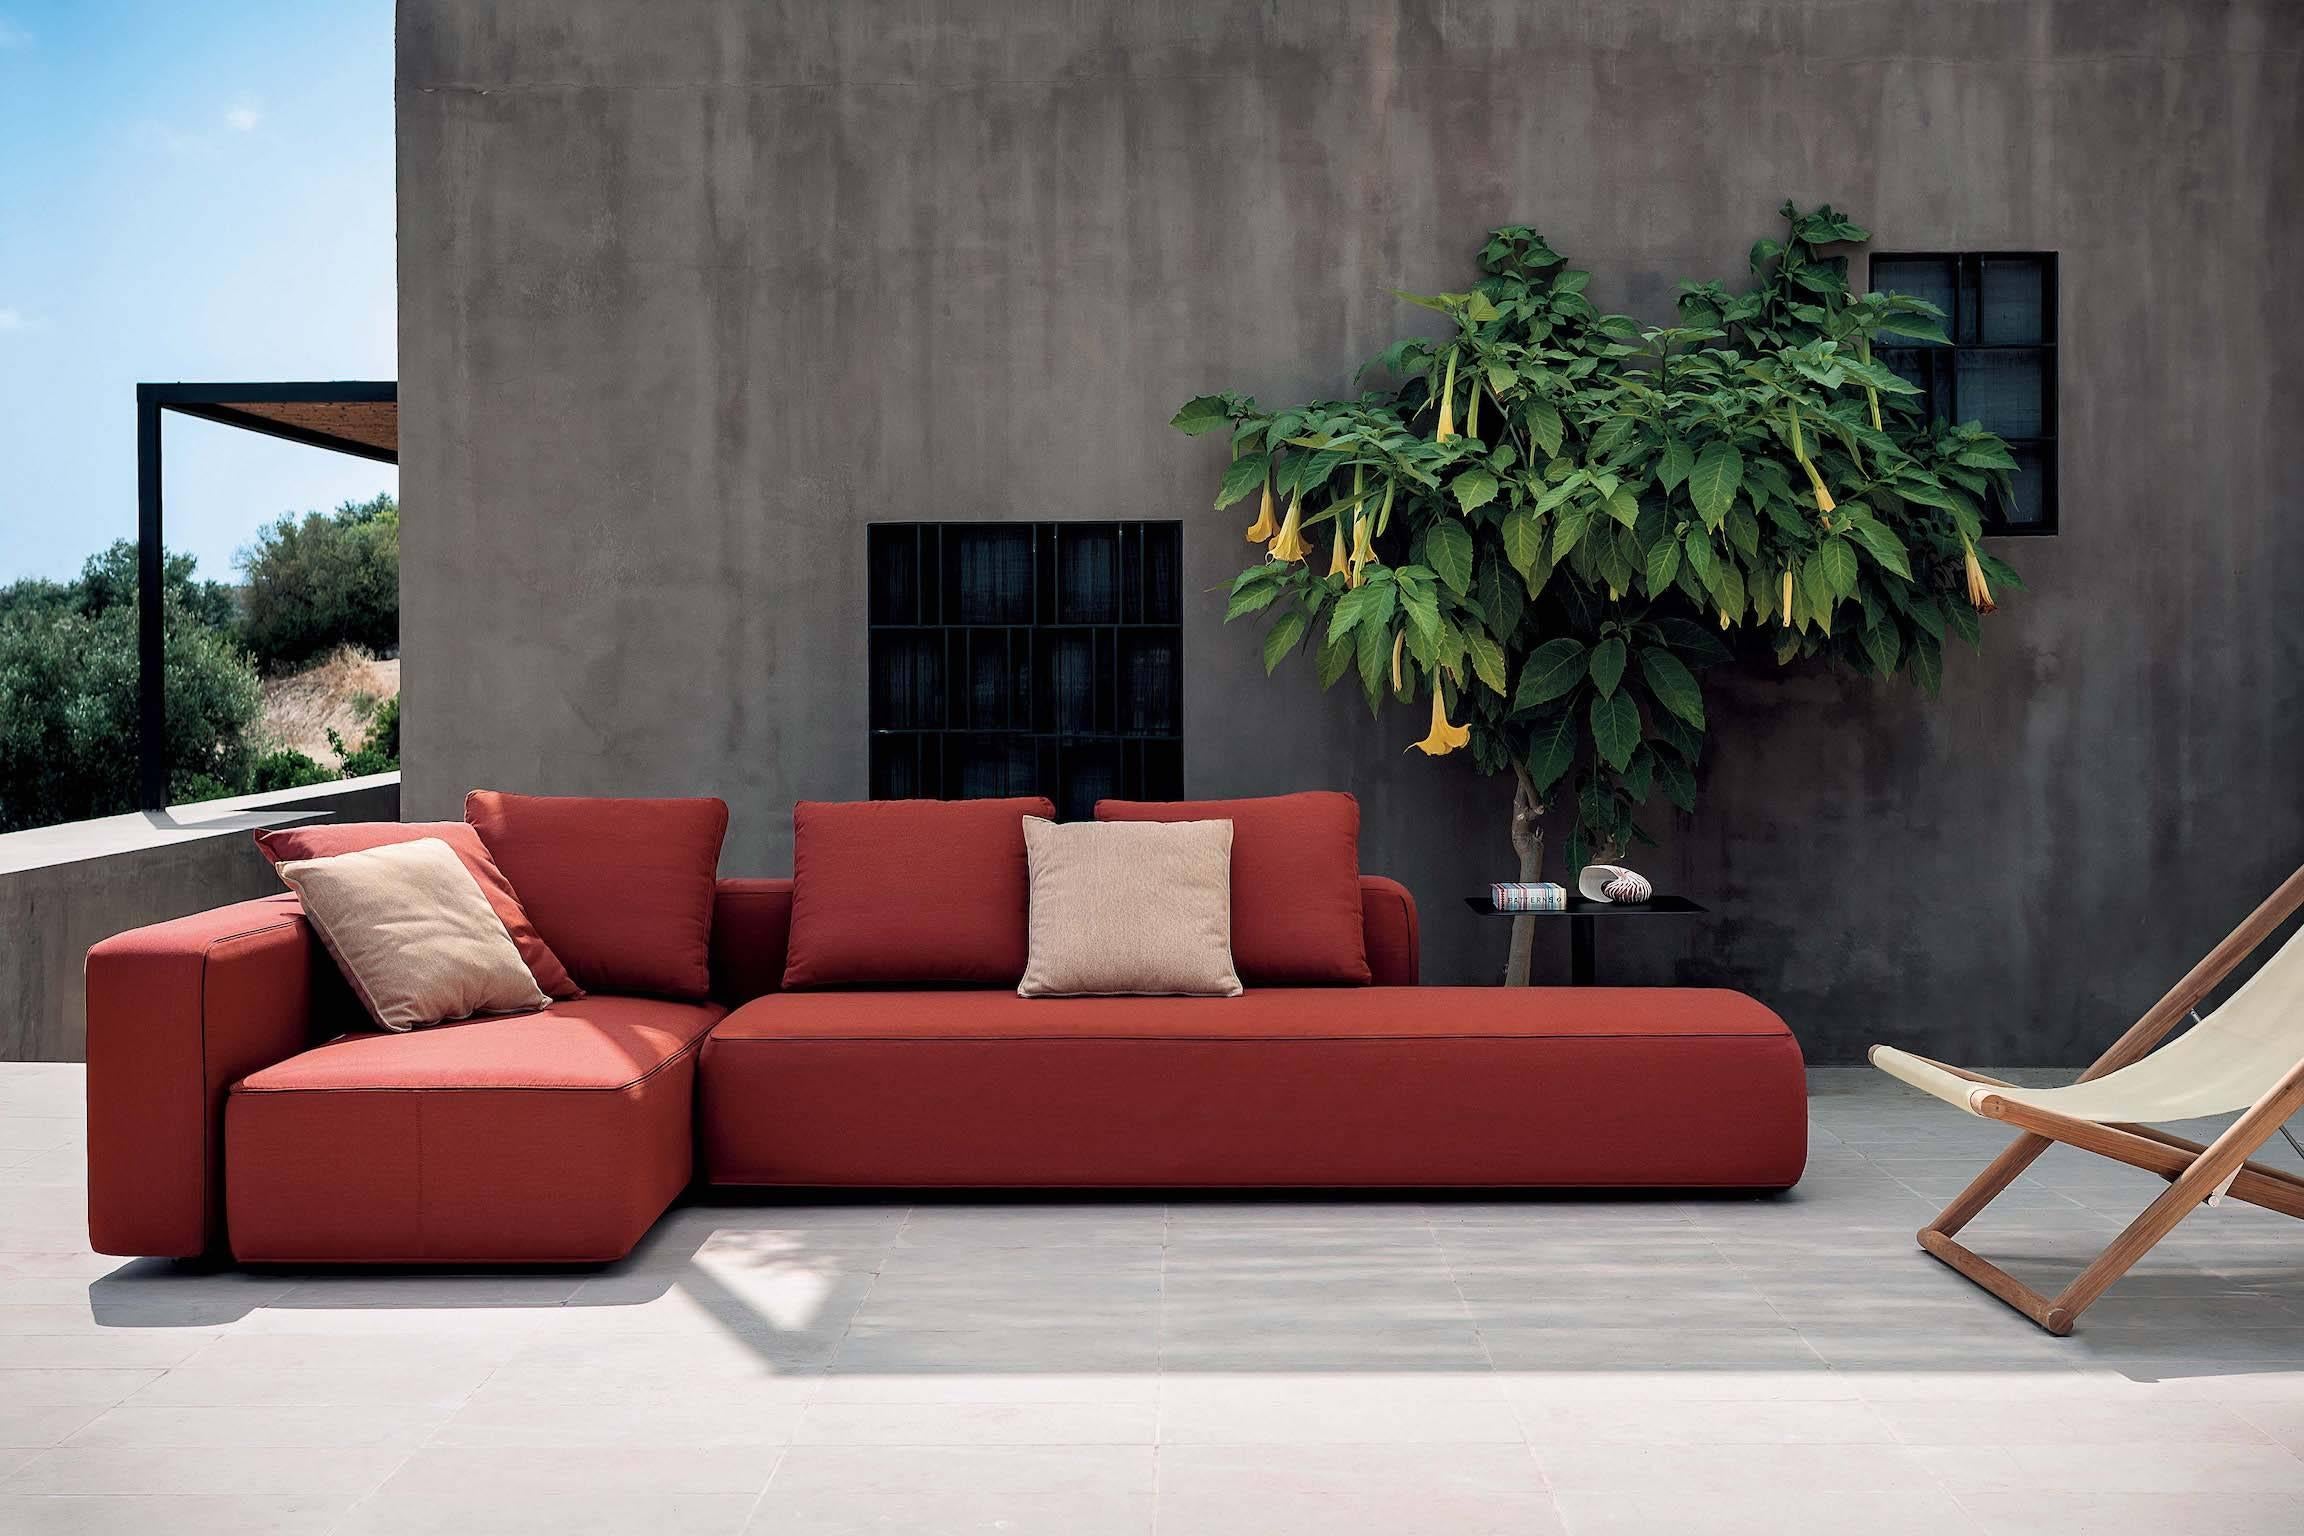 Roda Dandy Sofa for Outdoor or Indoor Use by Rodolfo Dordoni For Sale 1